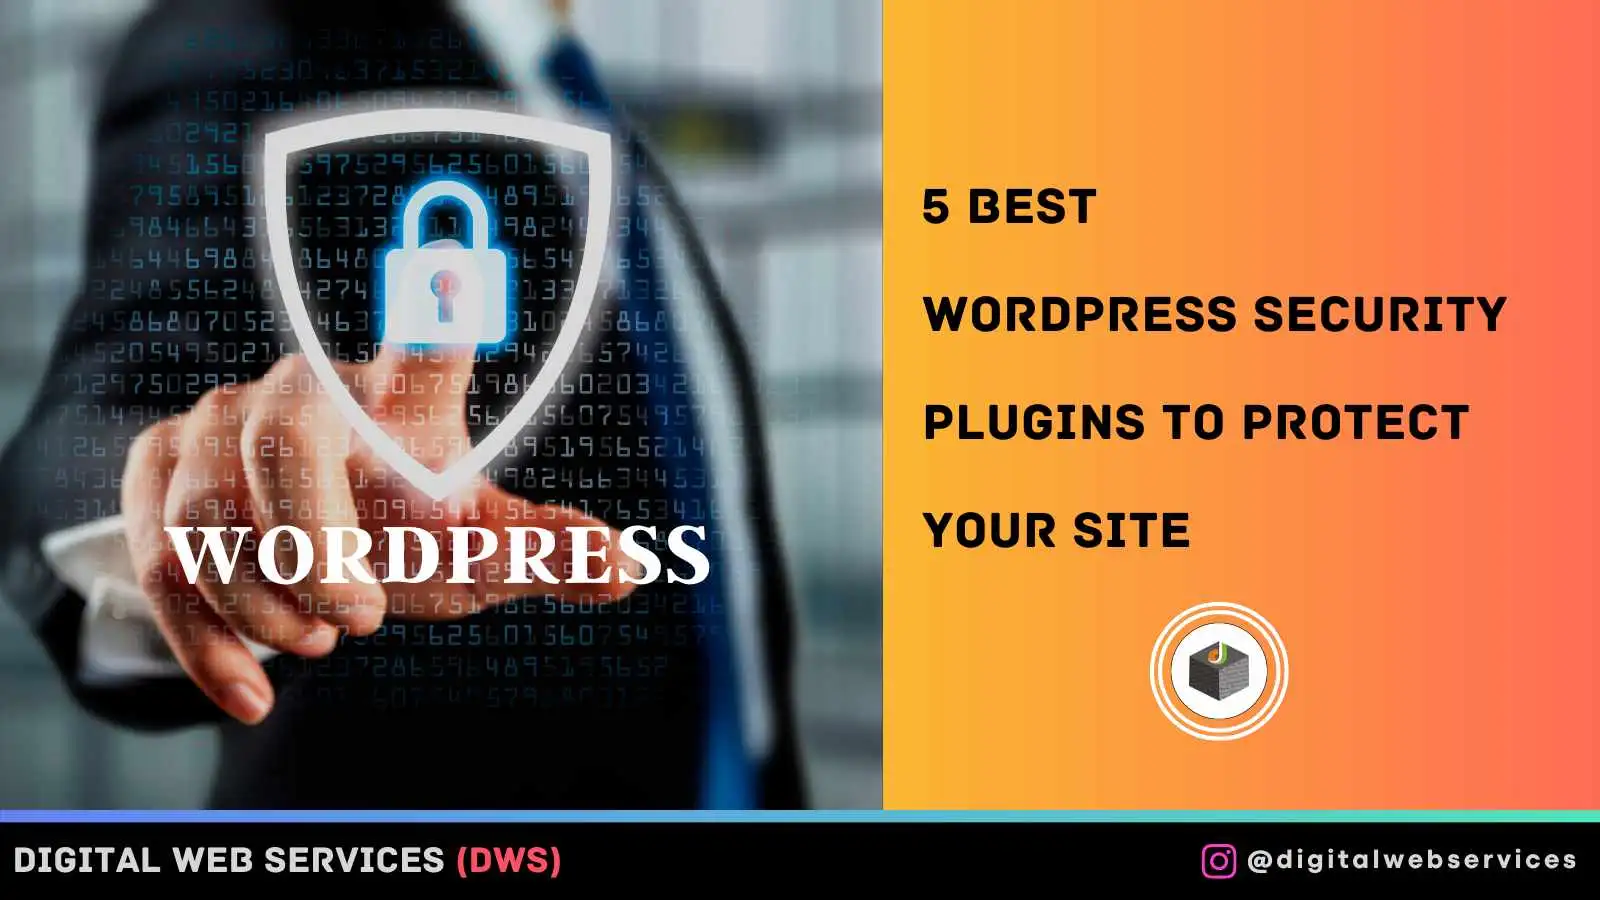 5 Best WordPress Security Plugins to Protect Your Site